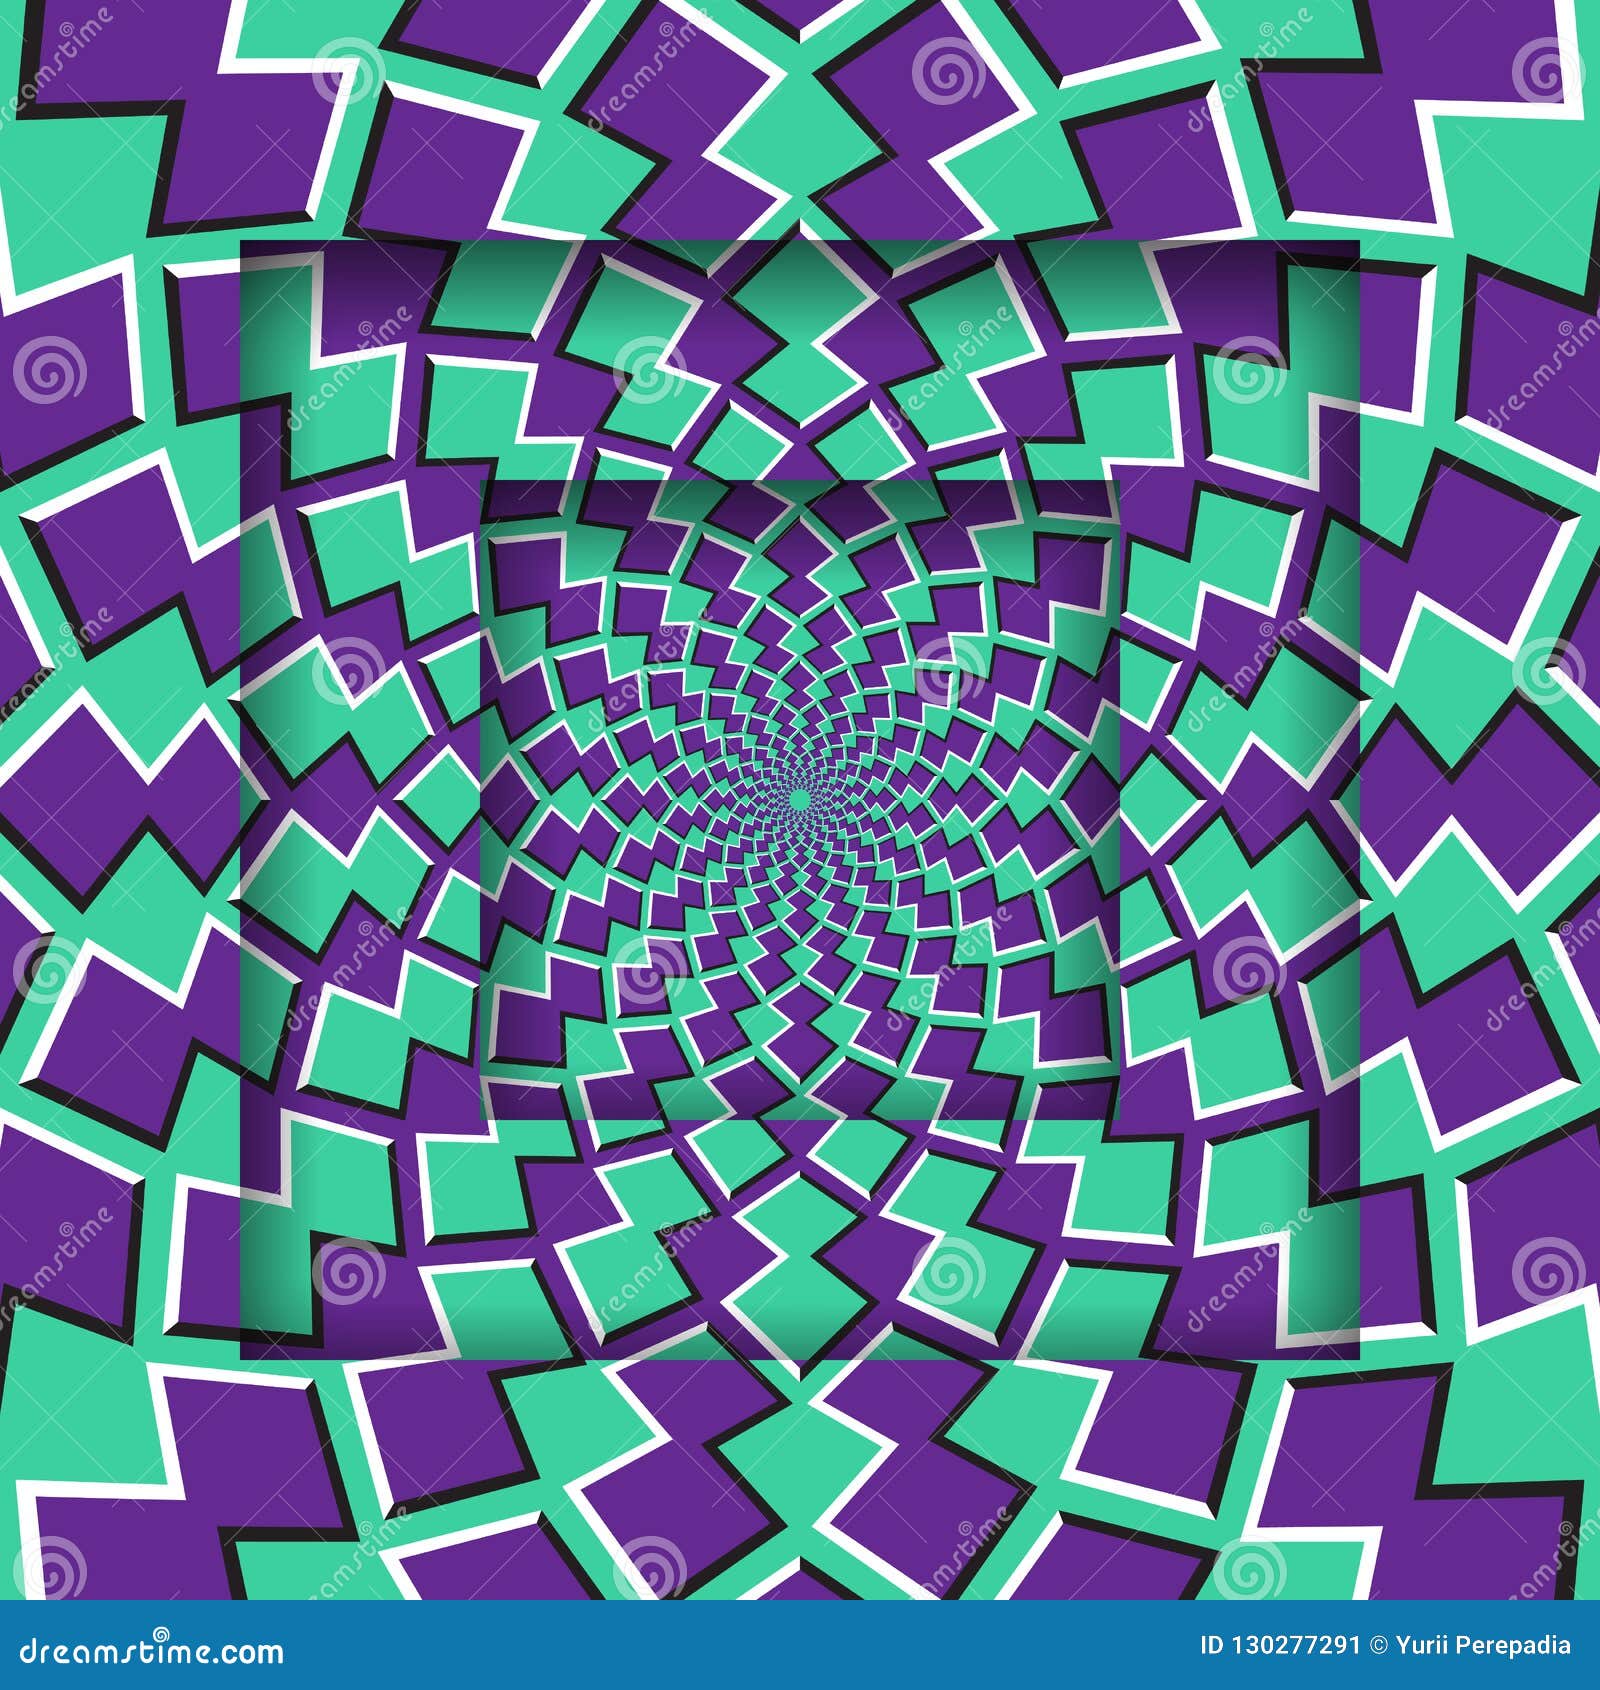 Abstract Square Frames with a Moving Circular Purple Green Pattern ...